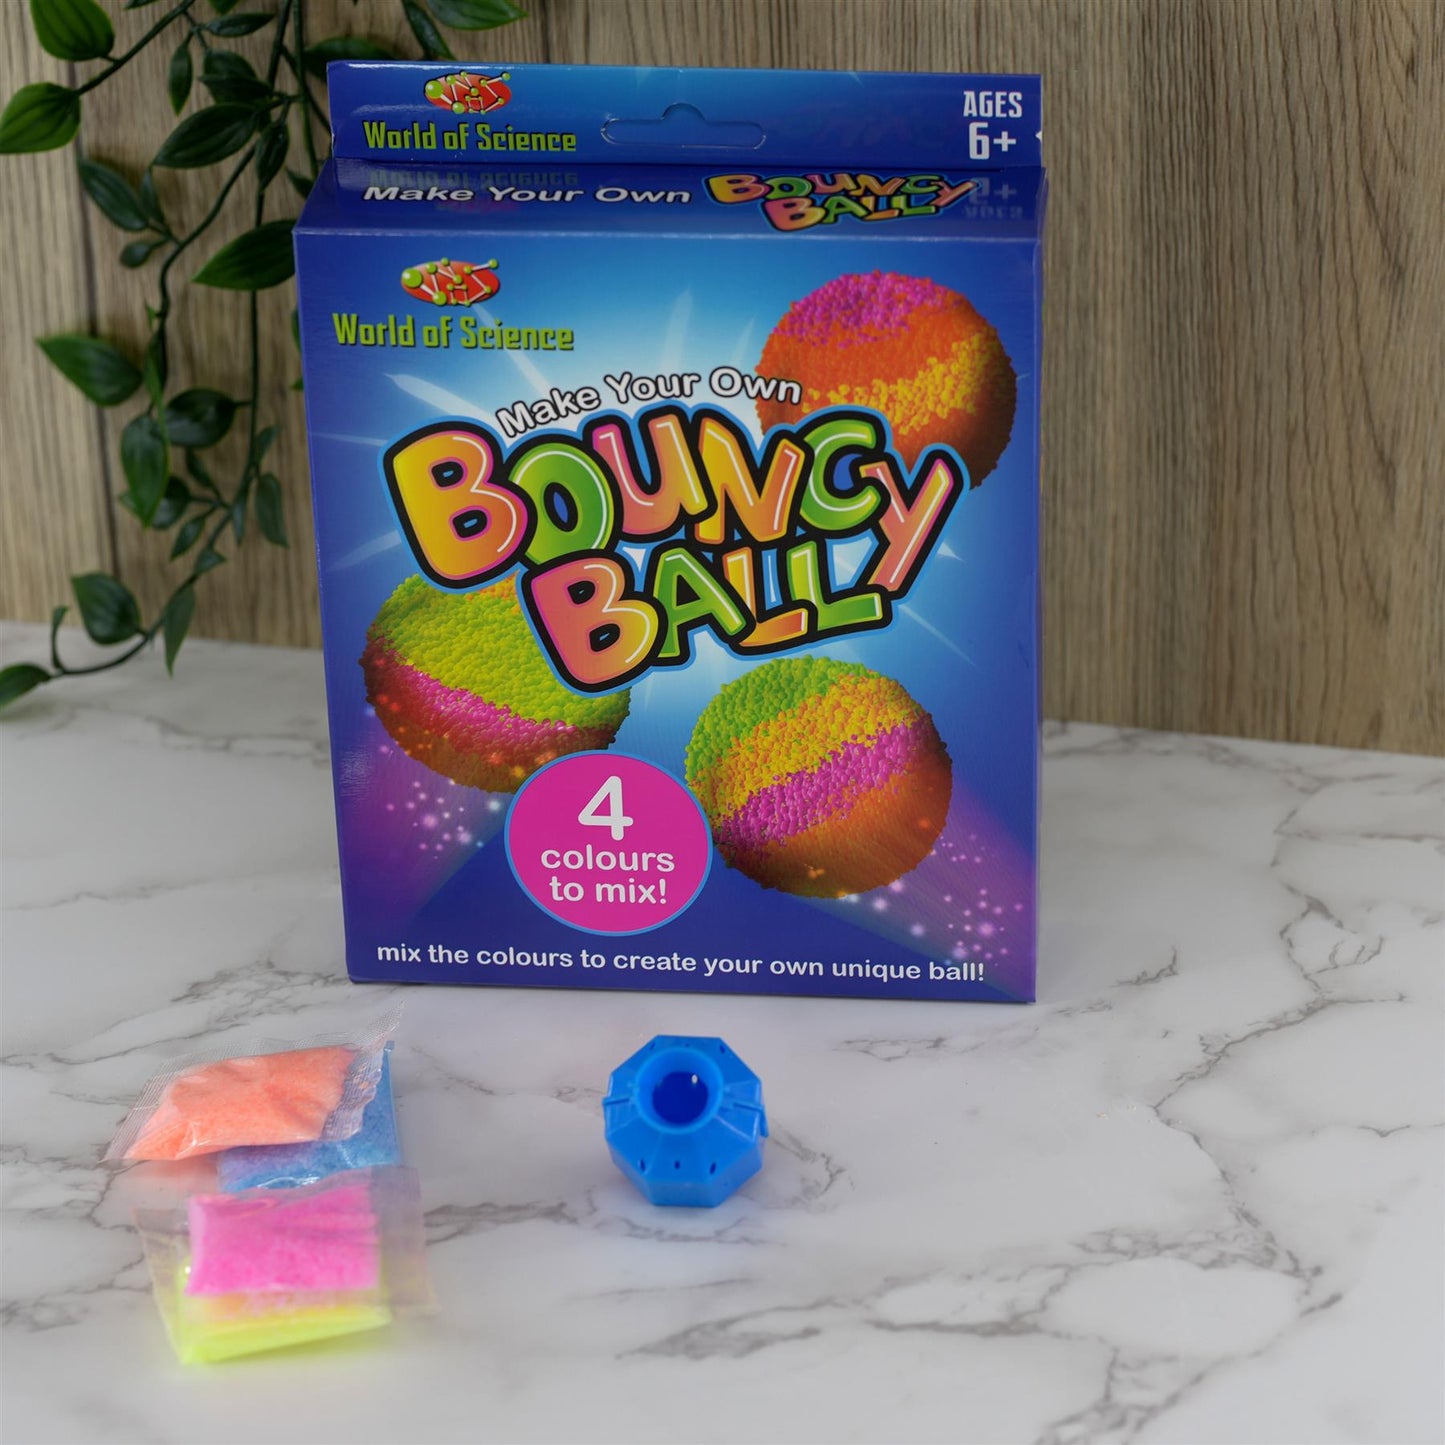 Make Your Own Bouncy Ball Kids Art Craft Set by The Magic Toy Shop - UKBuyZone